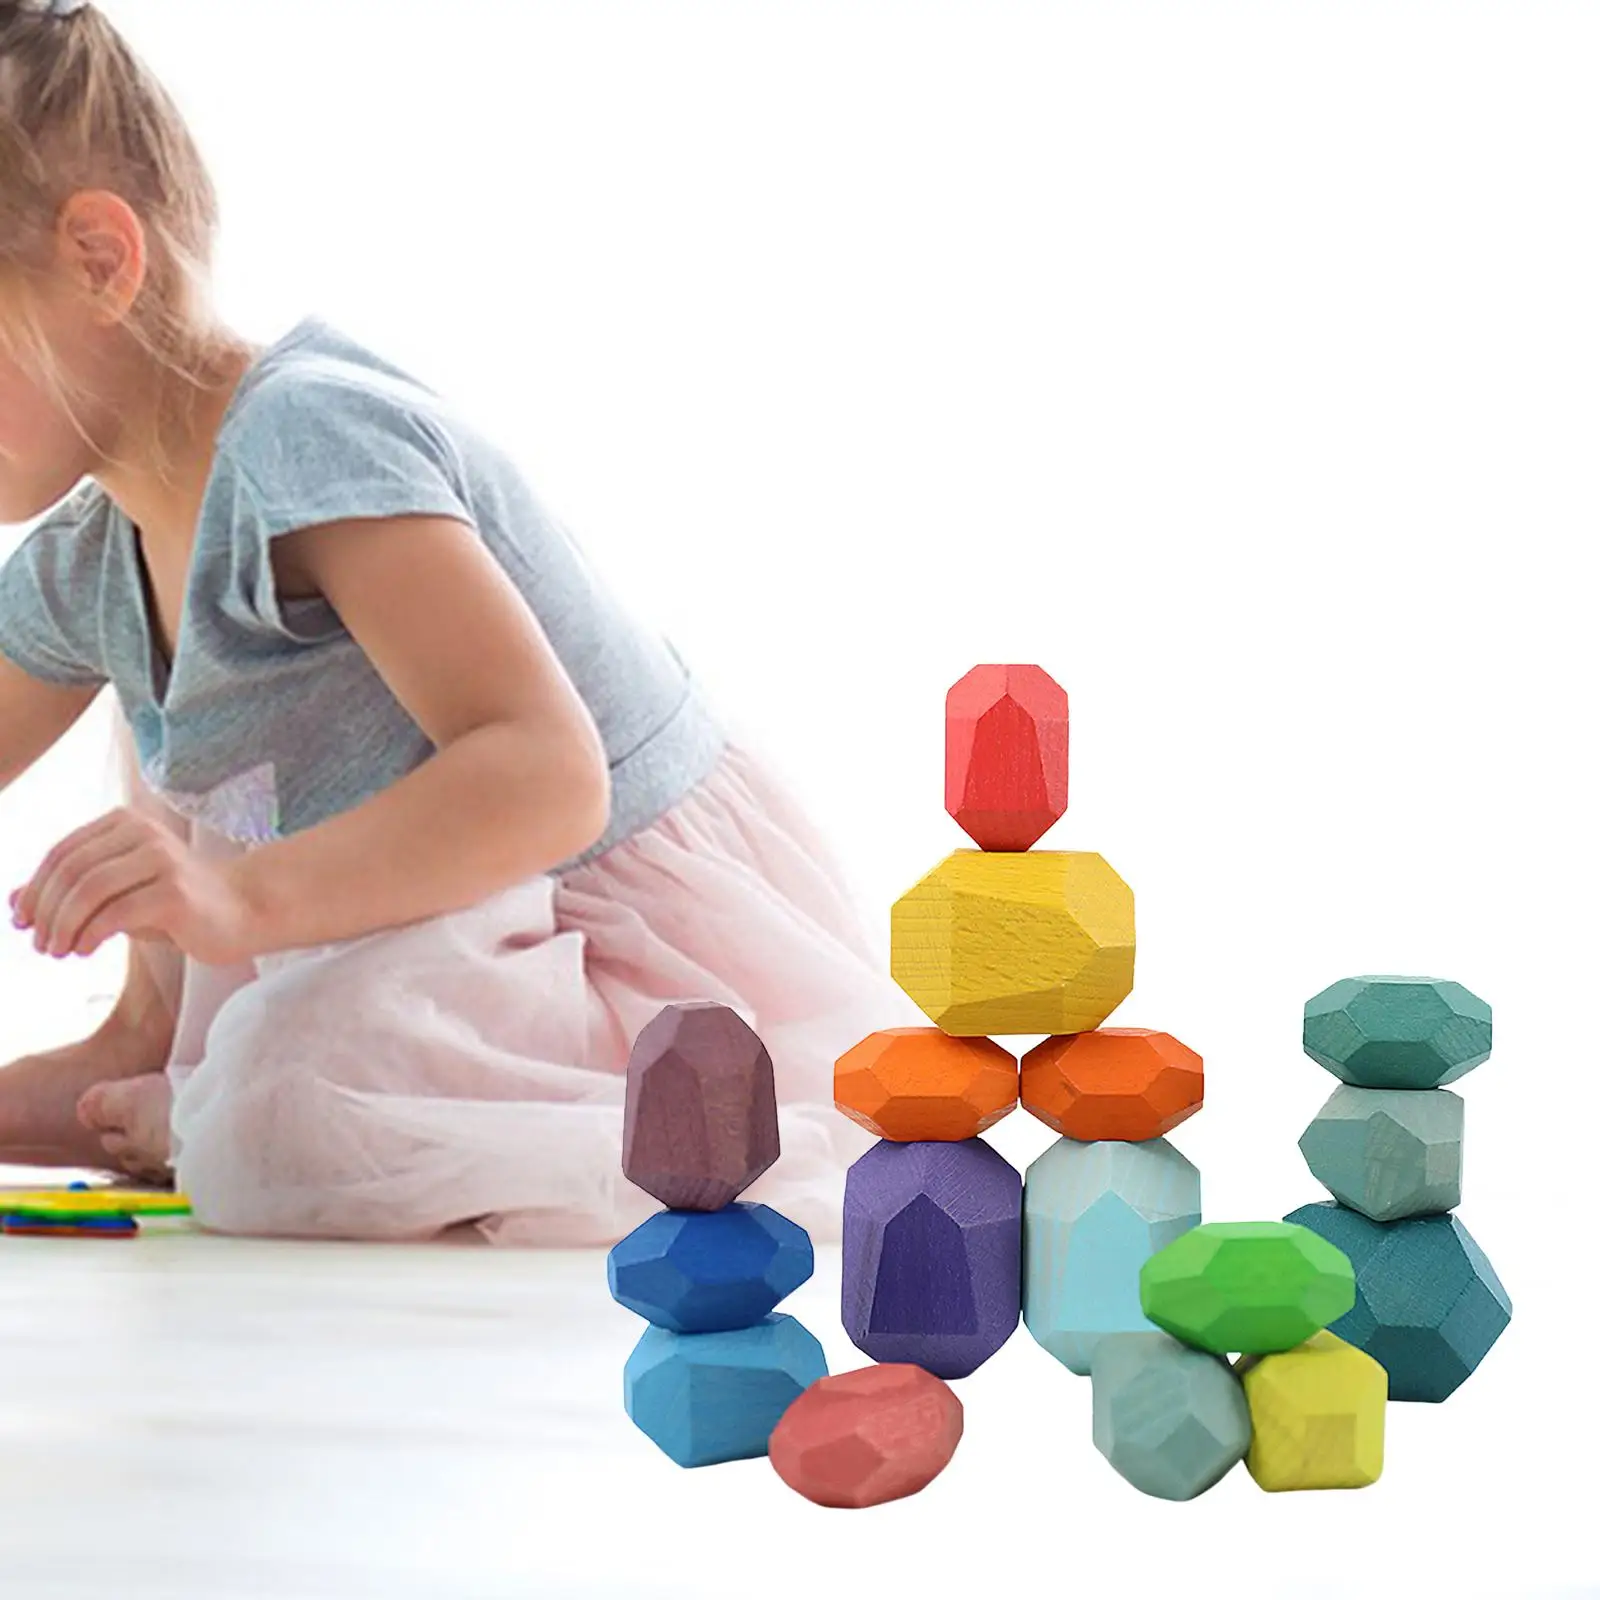 Wooden Balancing Stacking Stones Montessori Creative Lightweight Building Blocks Stacking Game for 3 Years up